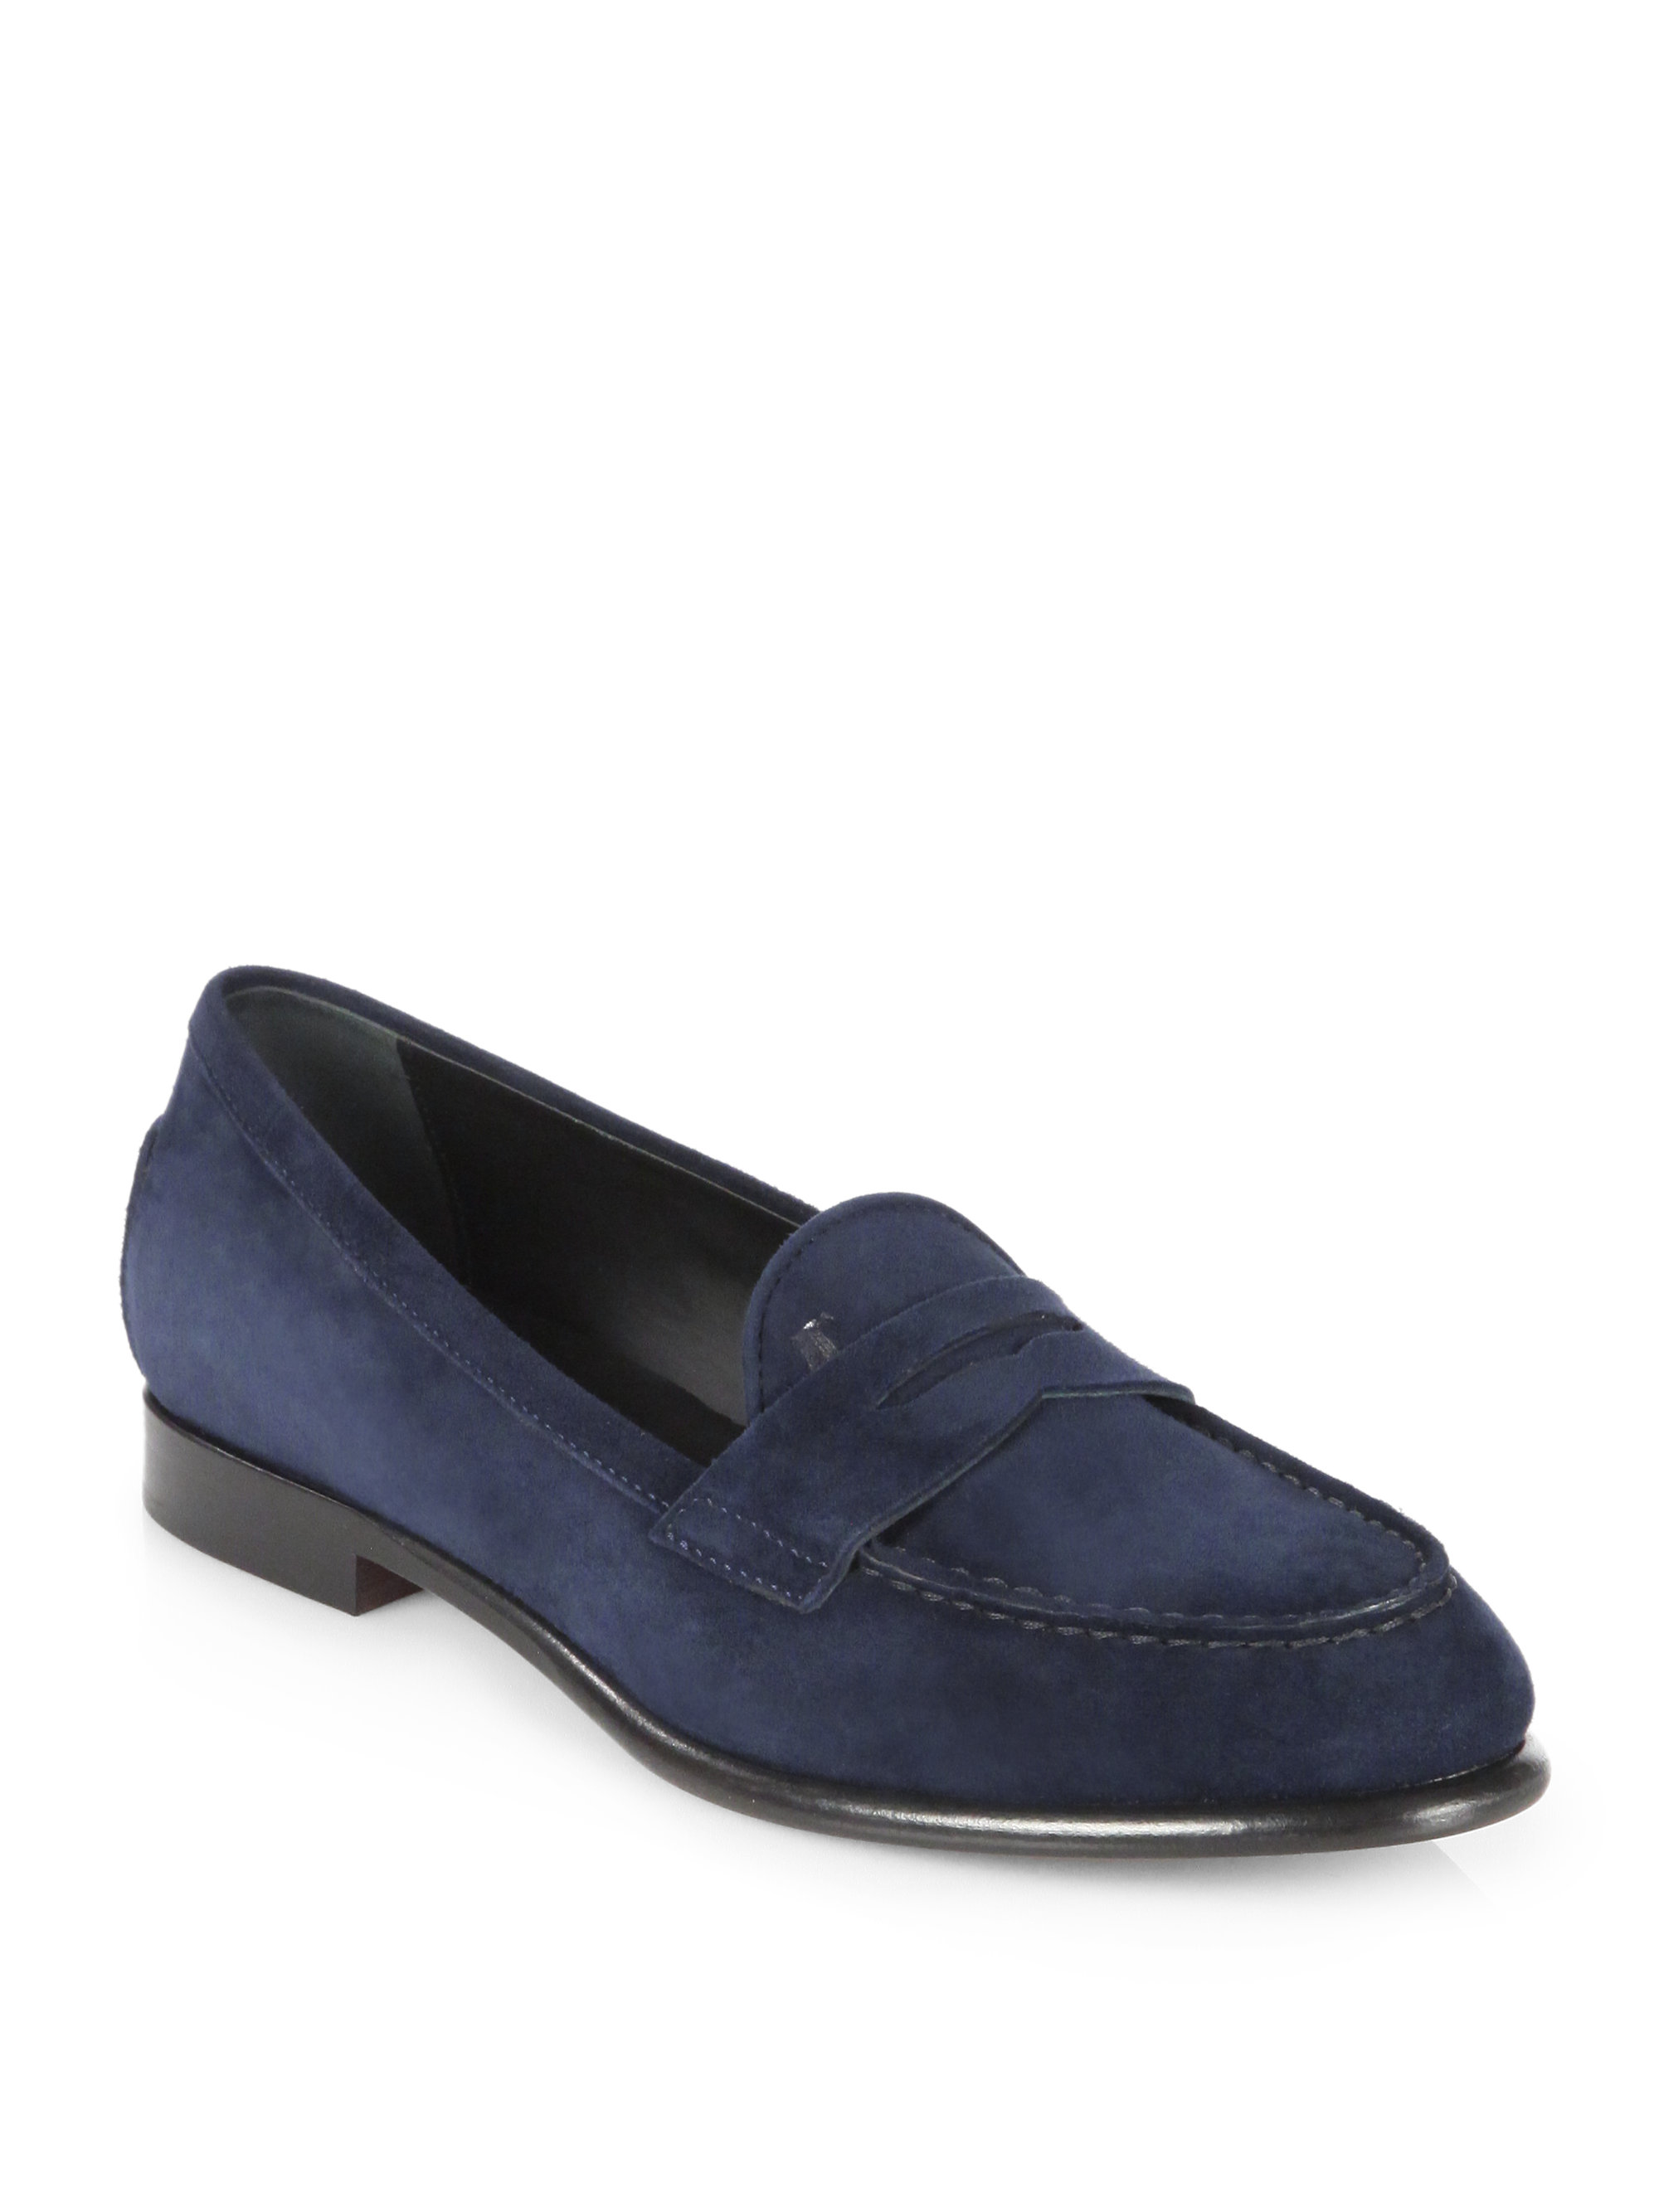 tods blue suede loafers